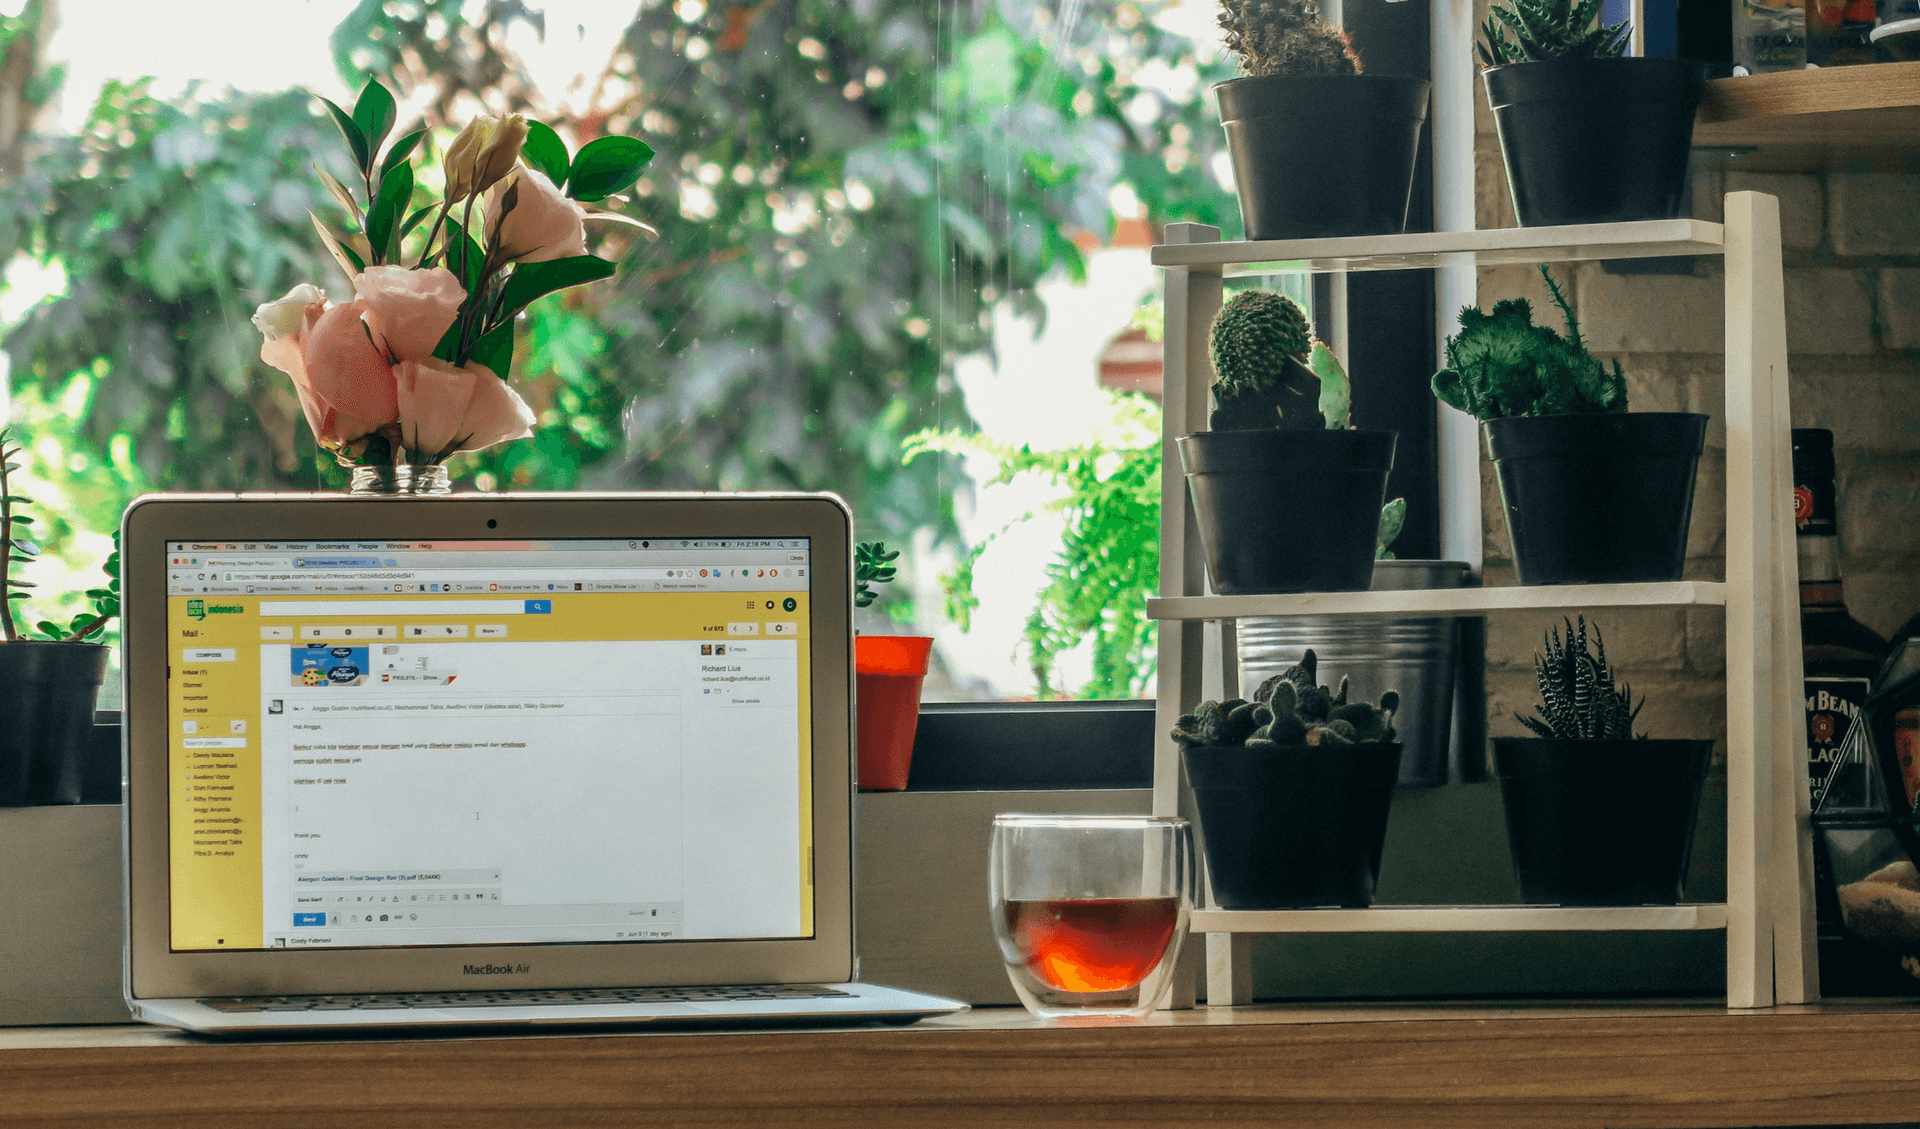 A scene of someone's desk with their email pulled up on their laptop, a cu of tea, and some house plants.